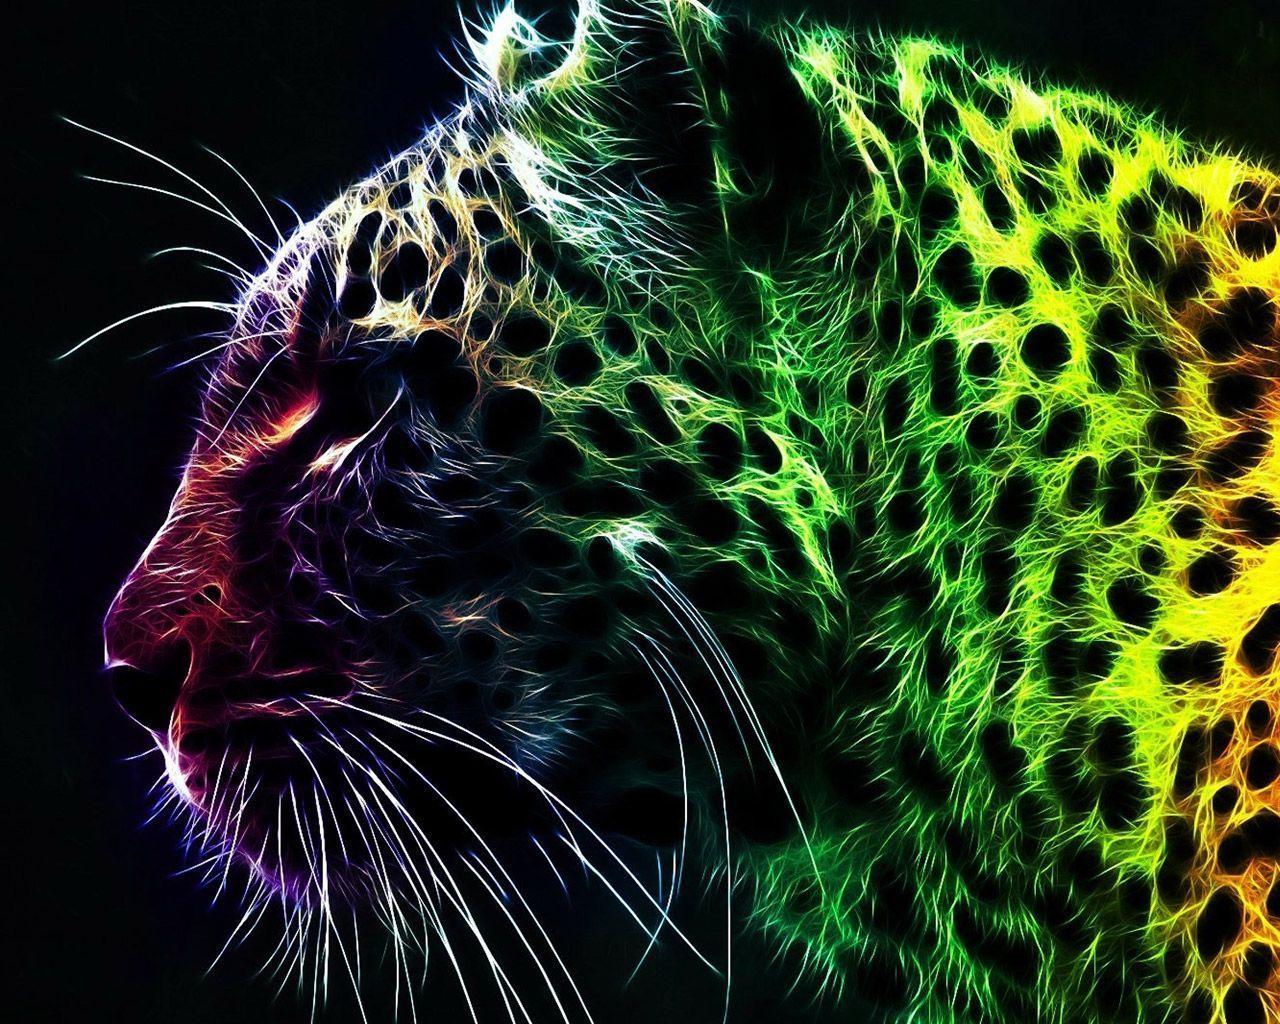 Awesome cheetah 3D Free HD Wallpaper for Desktop. Get Latest